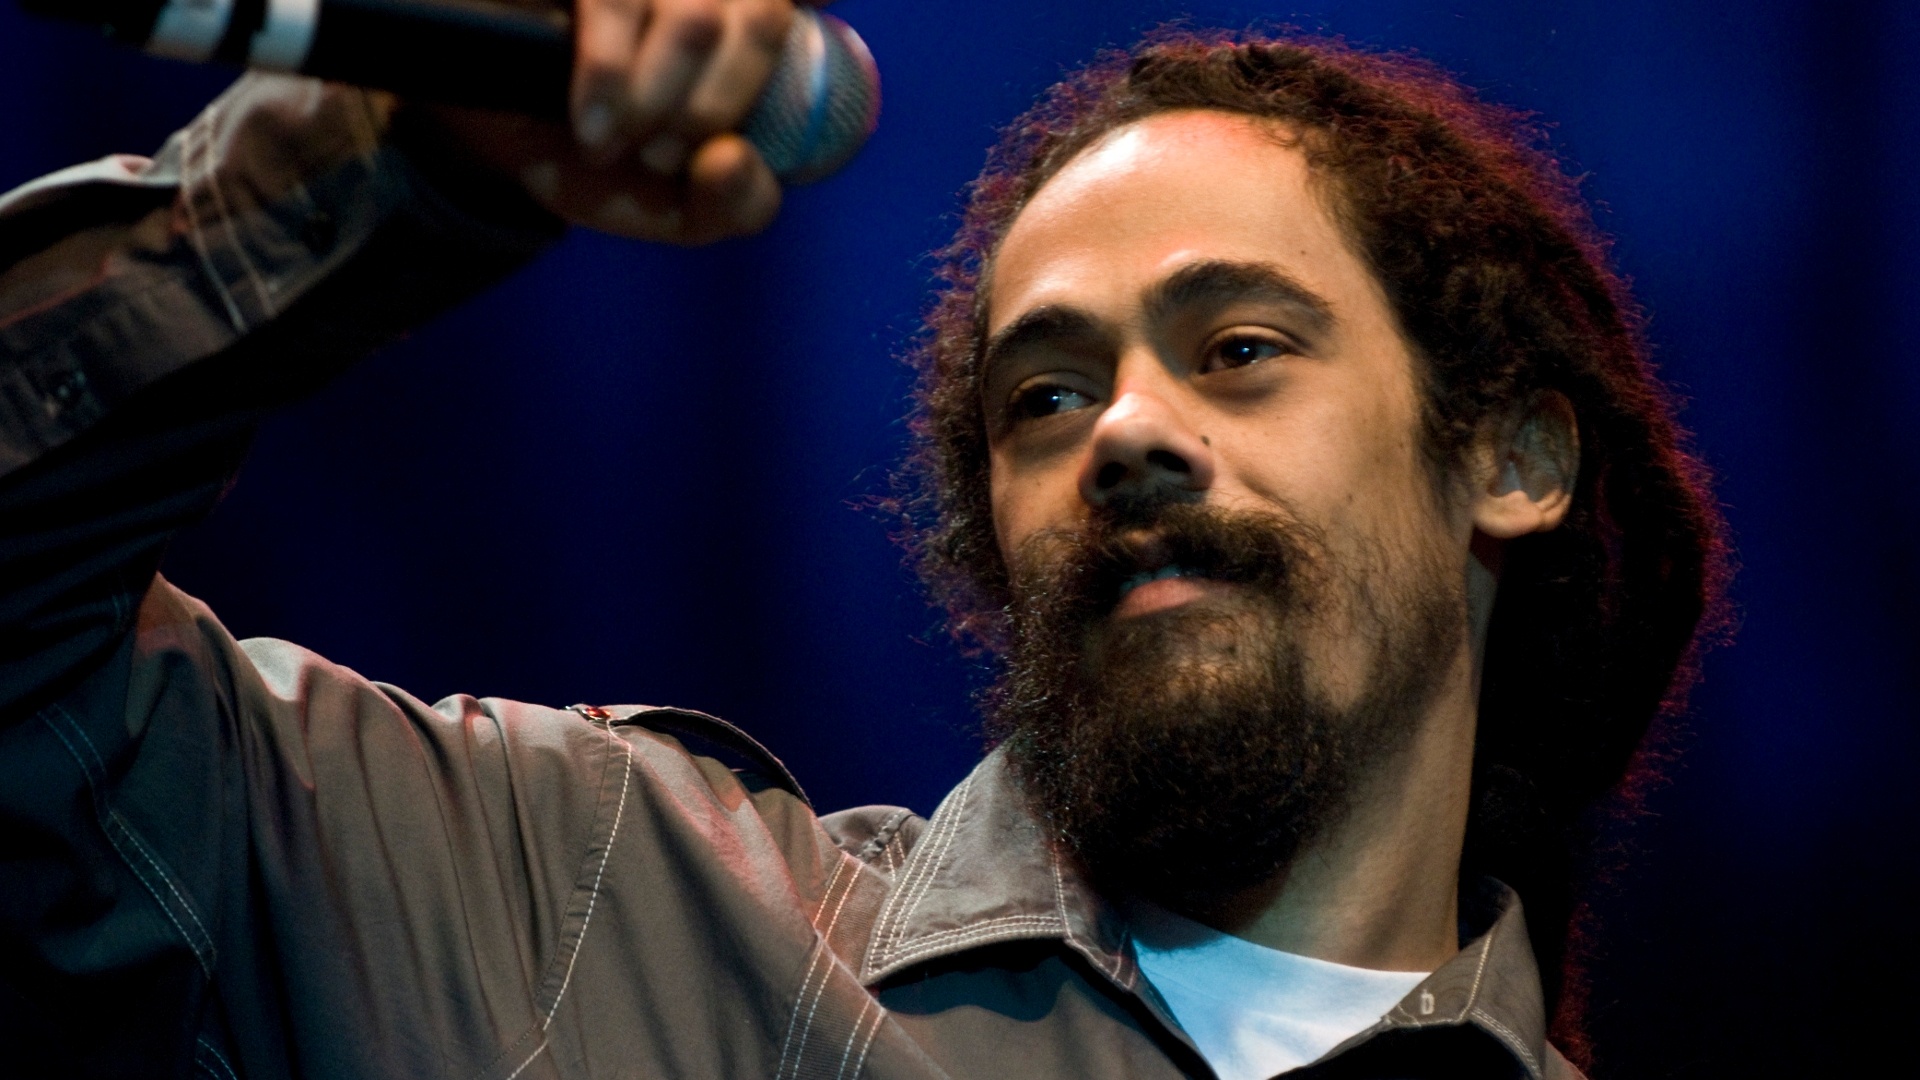 Damian Marley, Support for Damian, Solidarity, Musical admiration, 1920x1080 Full HD Desktop